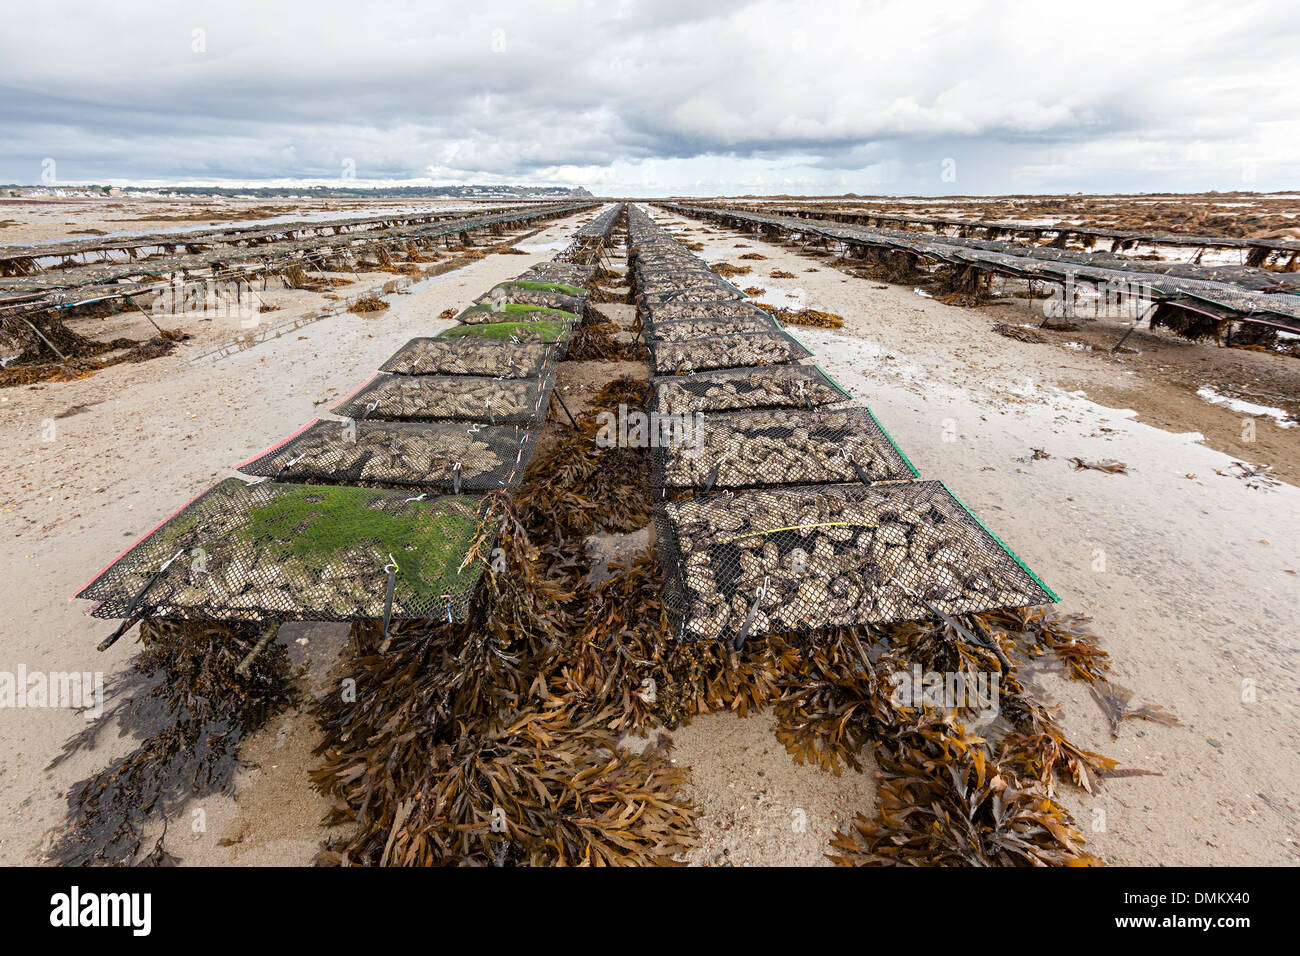 Oyster farming at low tide near Seymour Tower, Jersey, Channel Islands, UK Stock Photo